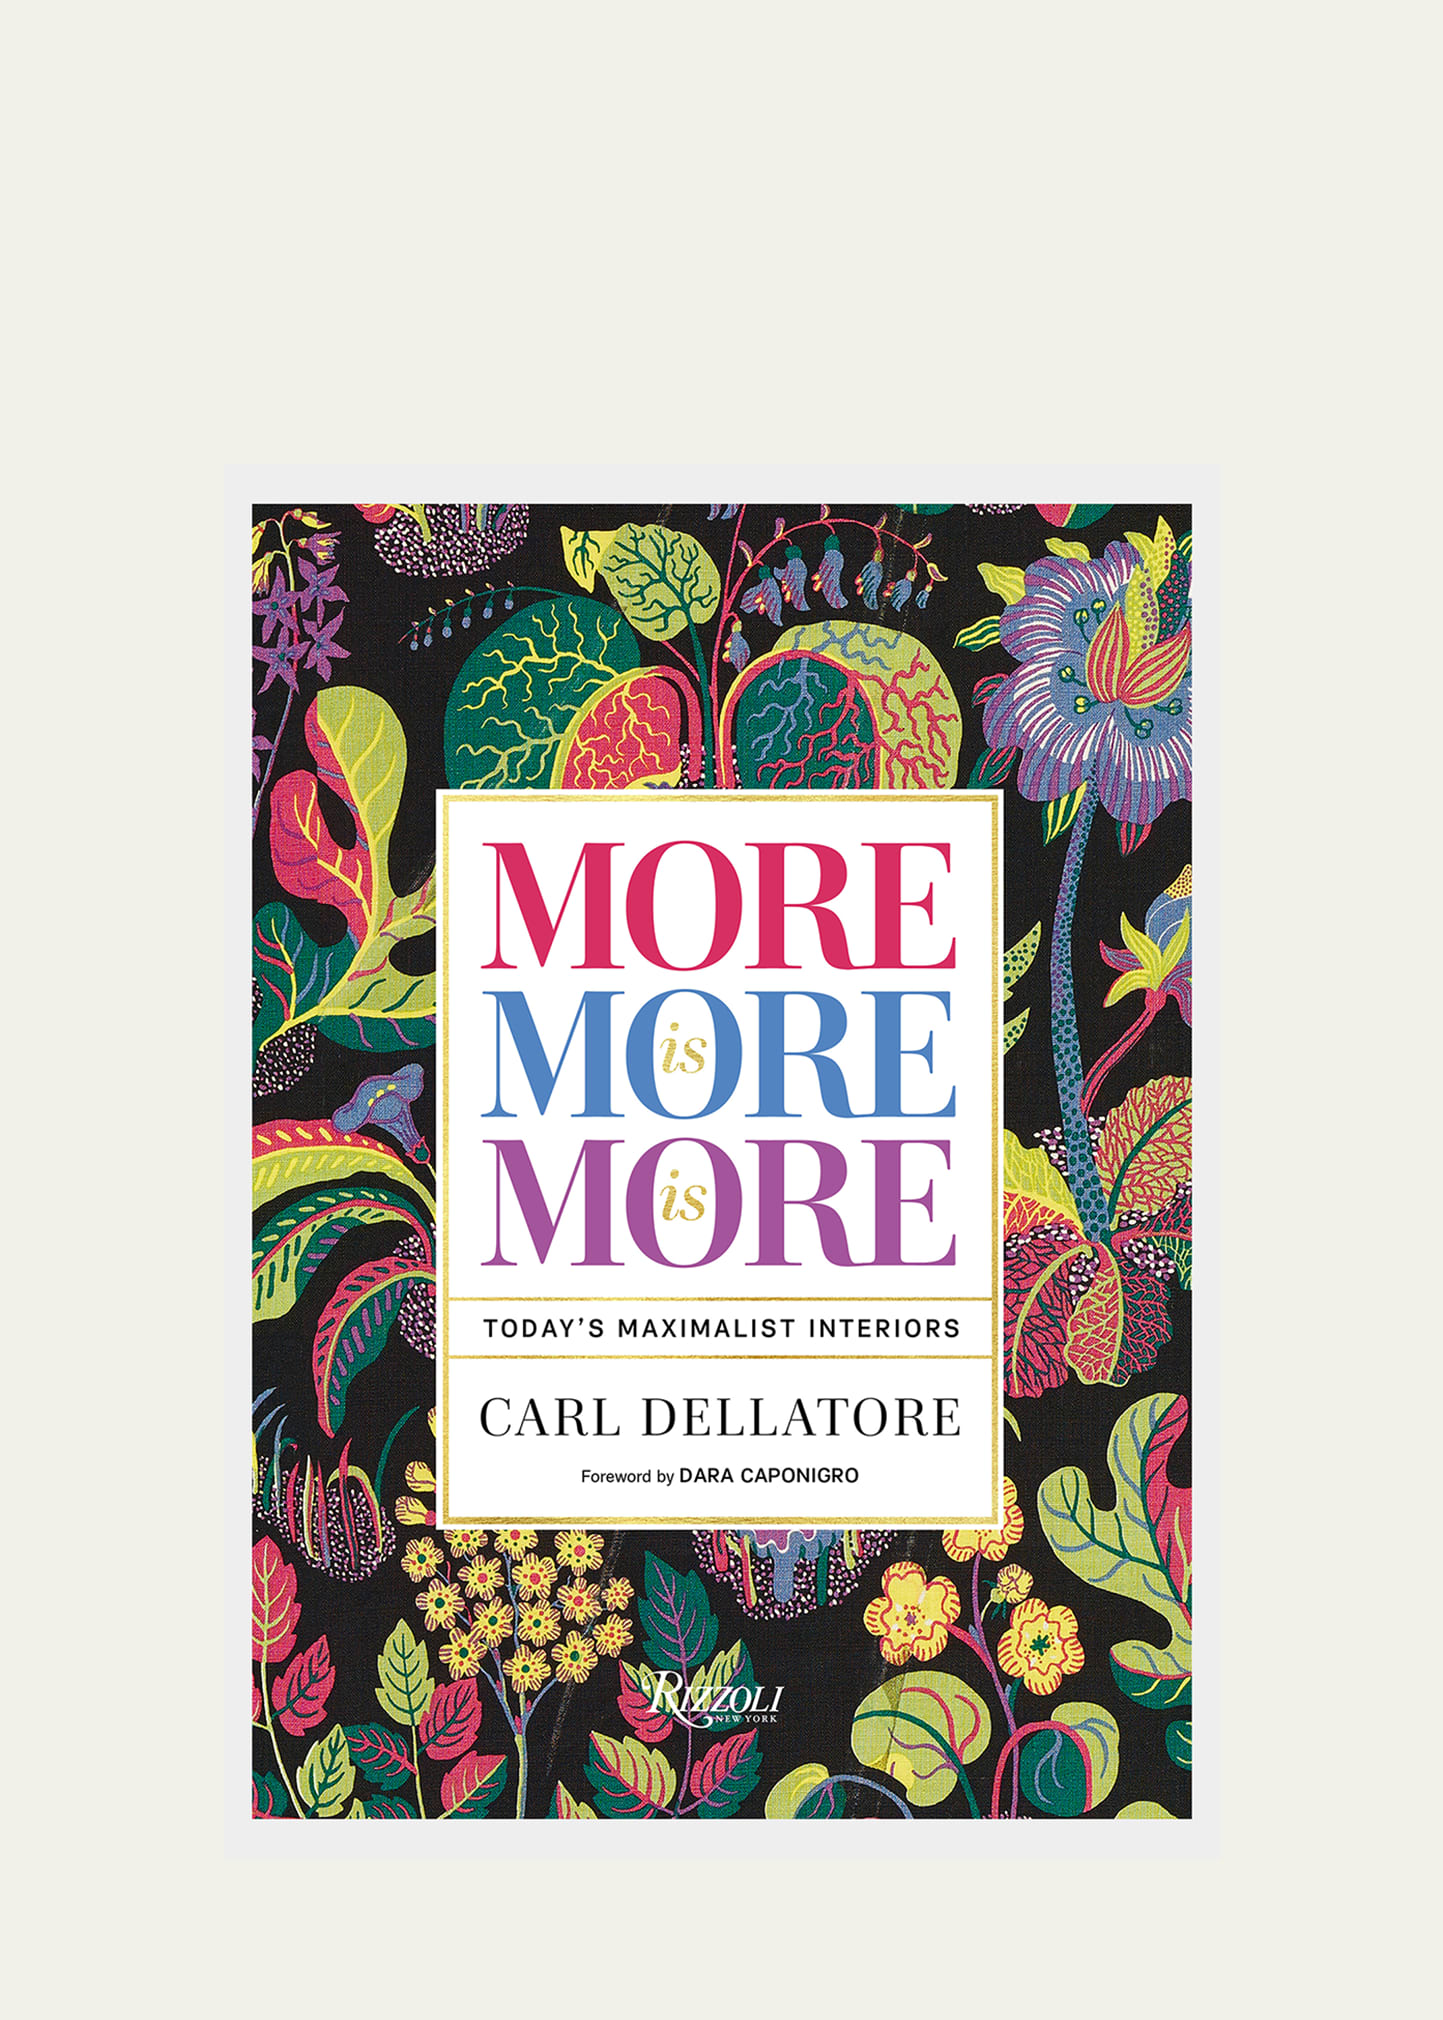 More is More is More Today's Maximalist Interiors Book by Carl Dellatore